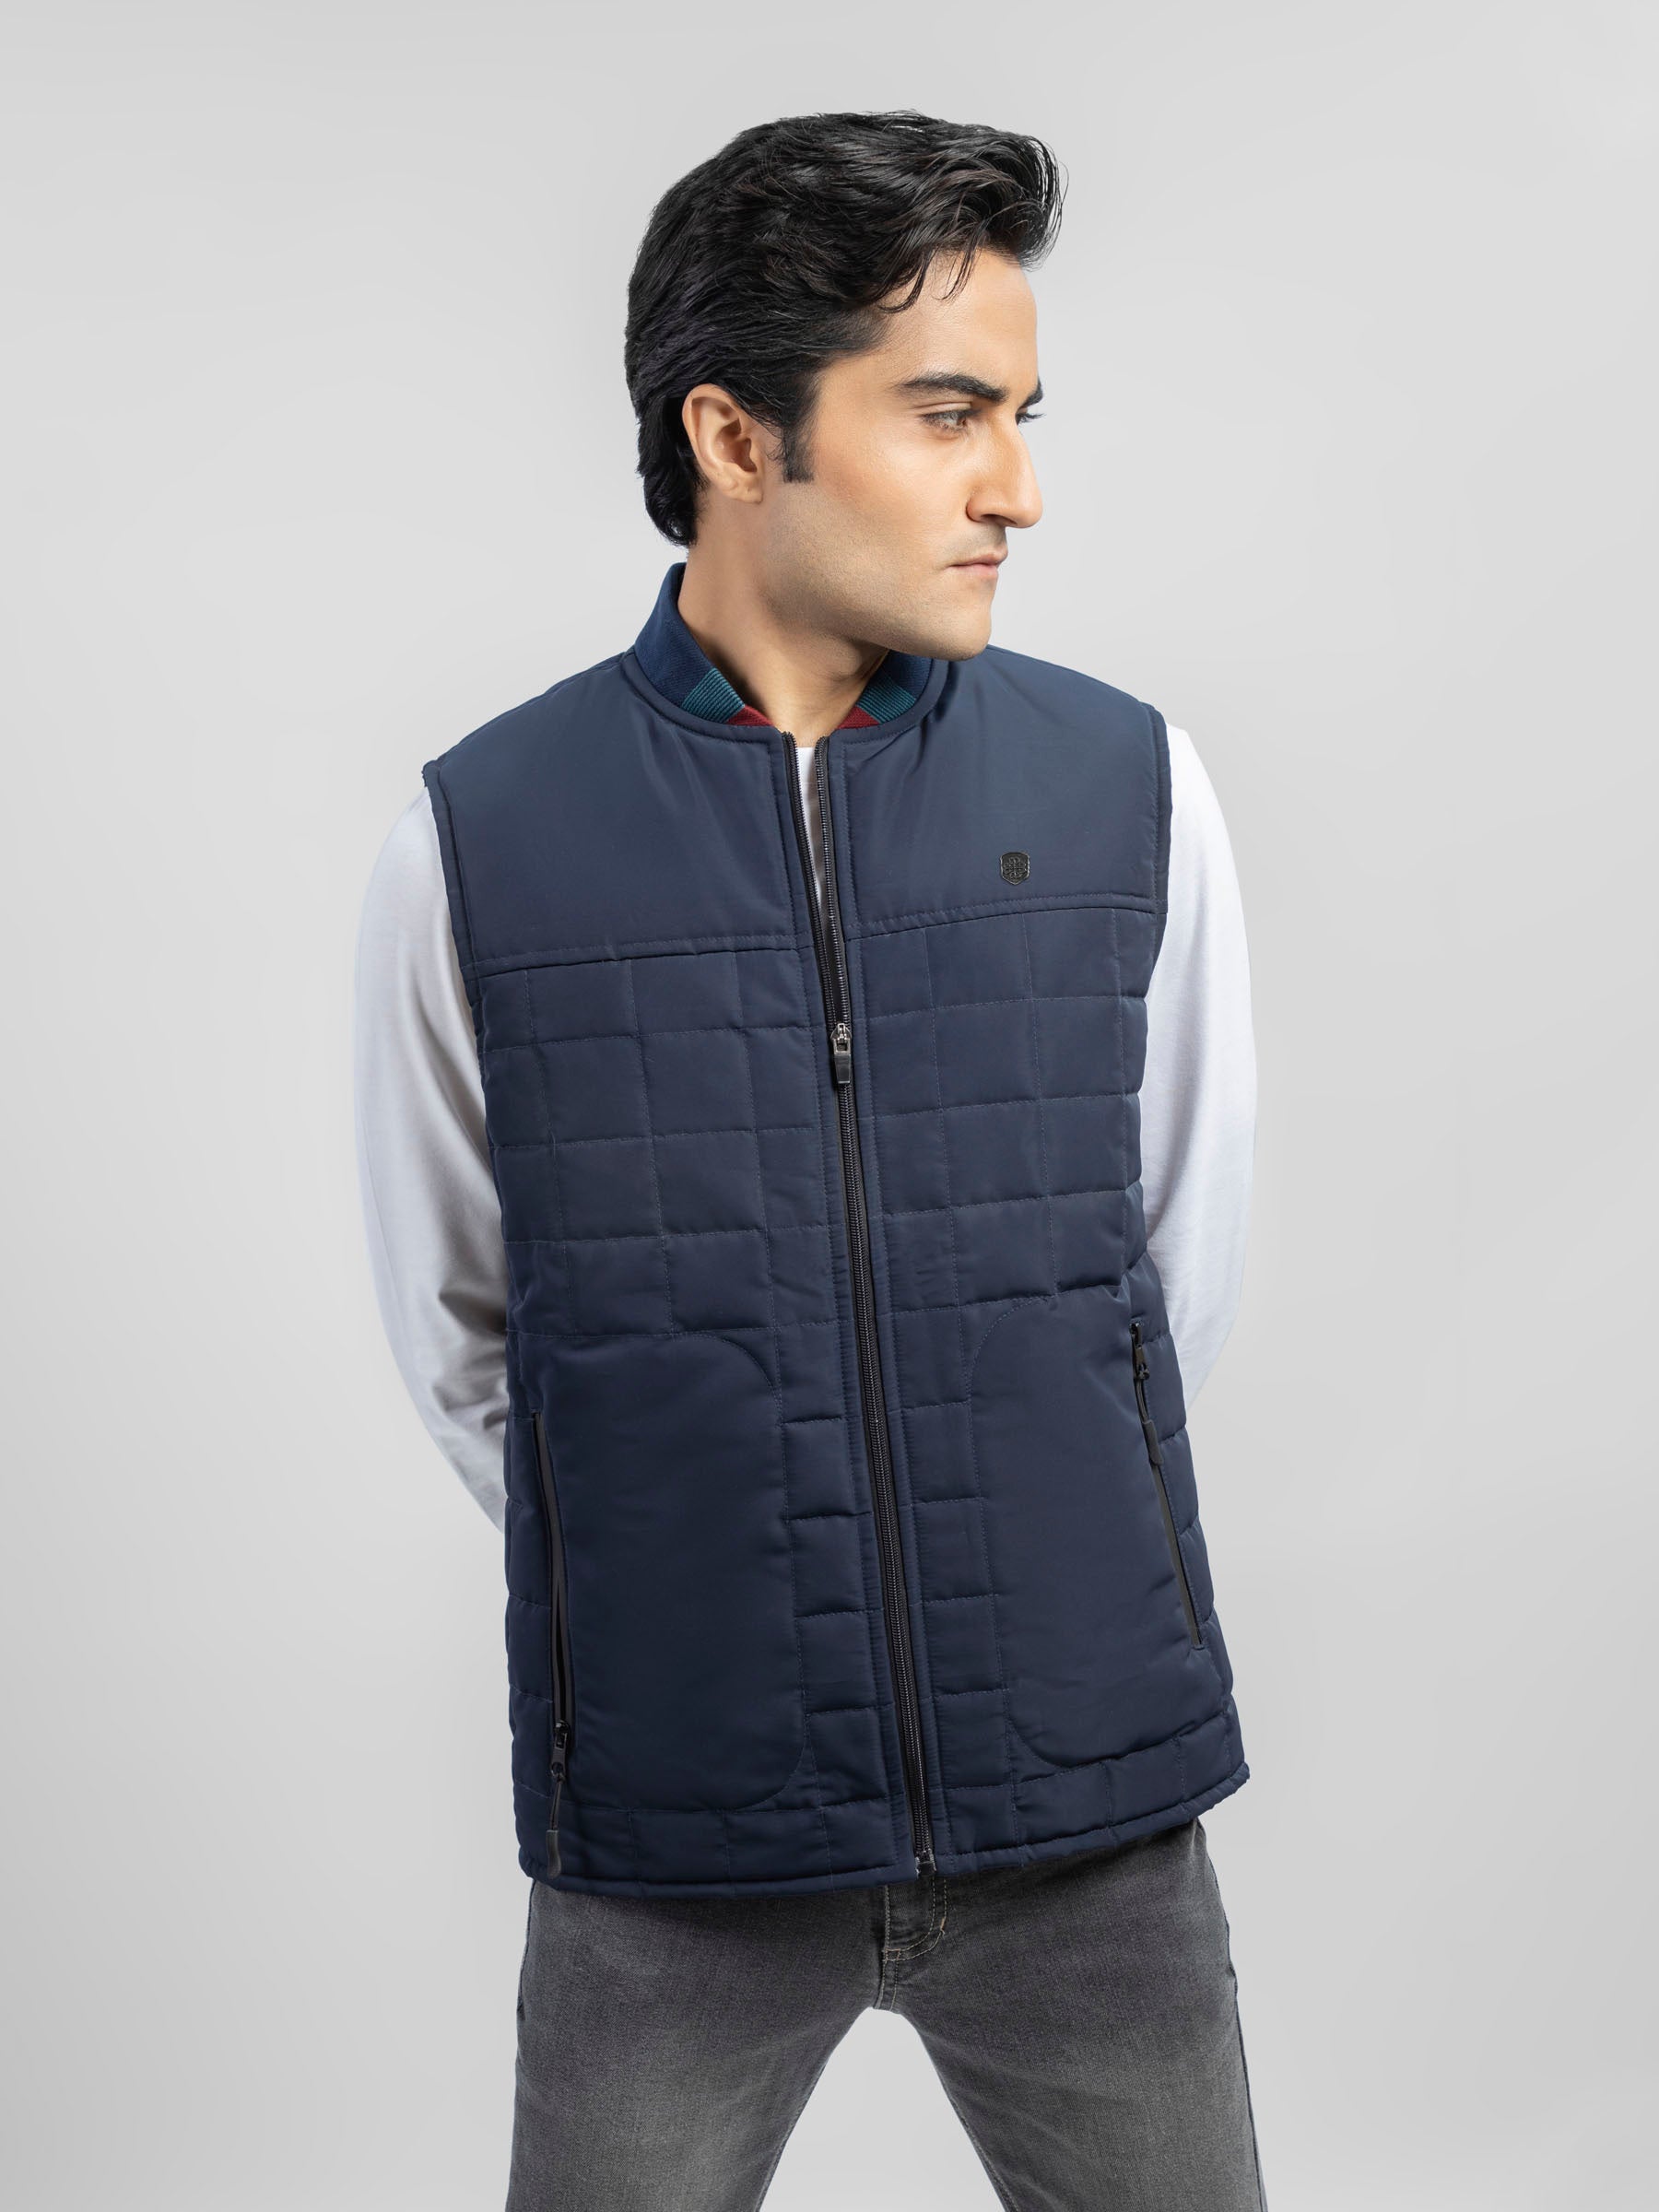 Navy Blue Sleeveless Quilted Vest With Sporty Baseball Collar – Brumano